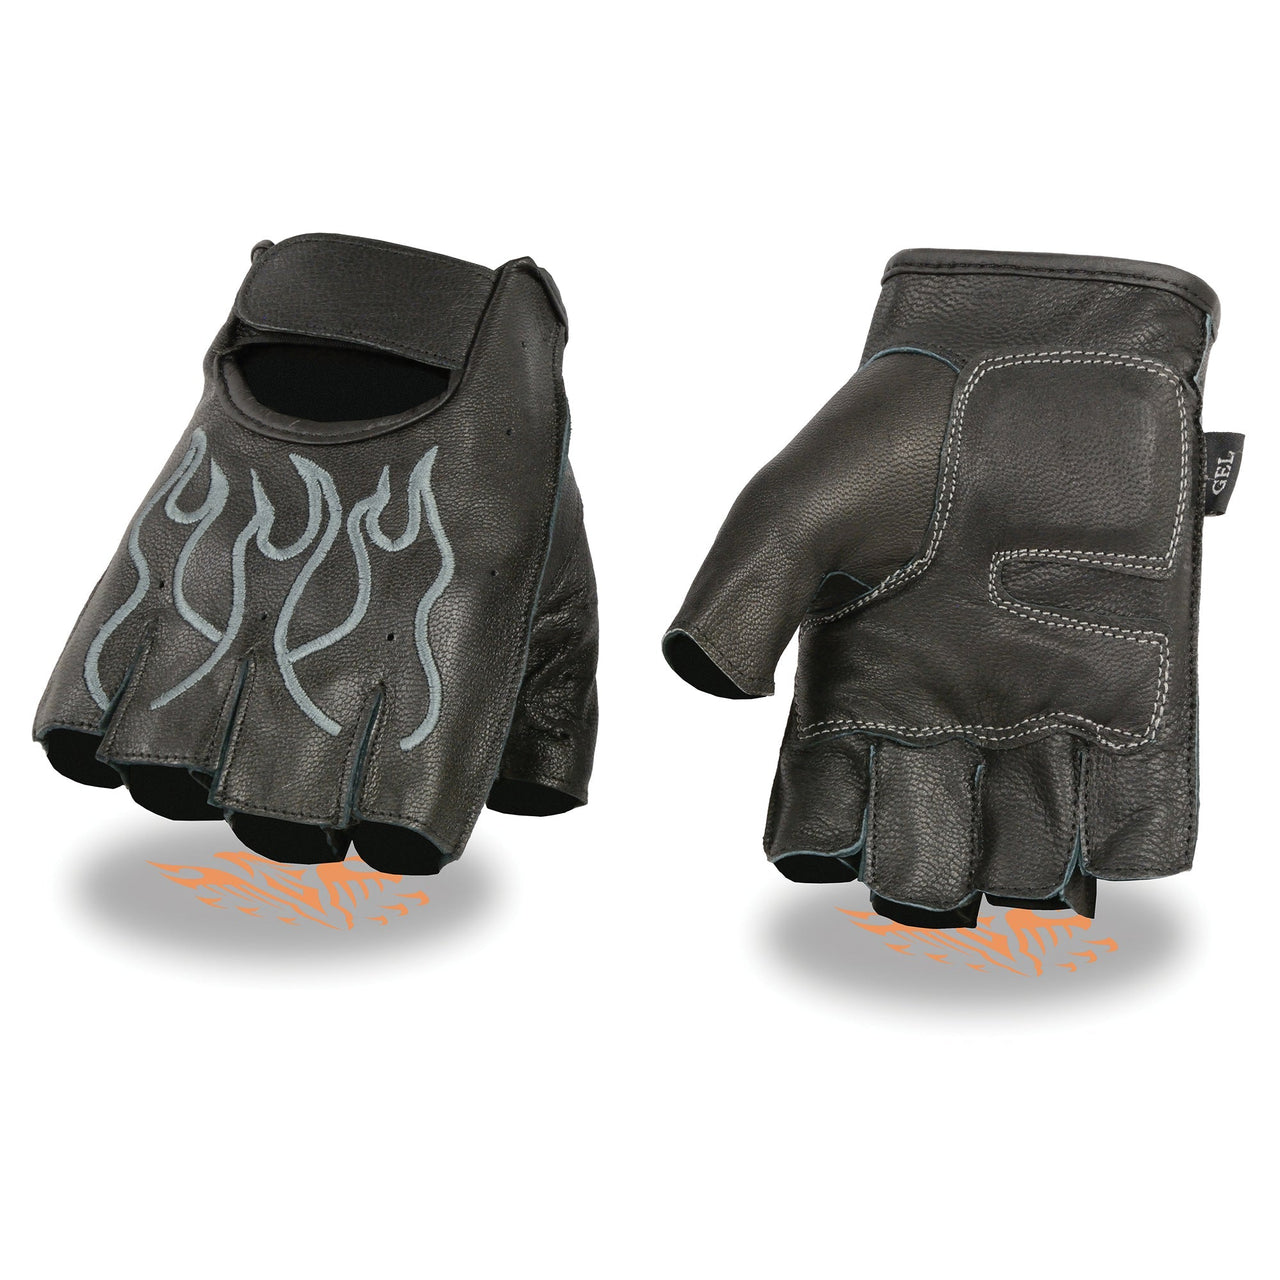 Men's Flame Embroidered Fingerless Glove w/ Gel Palm - HighwayLeather